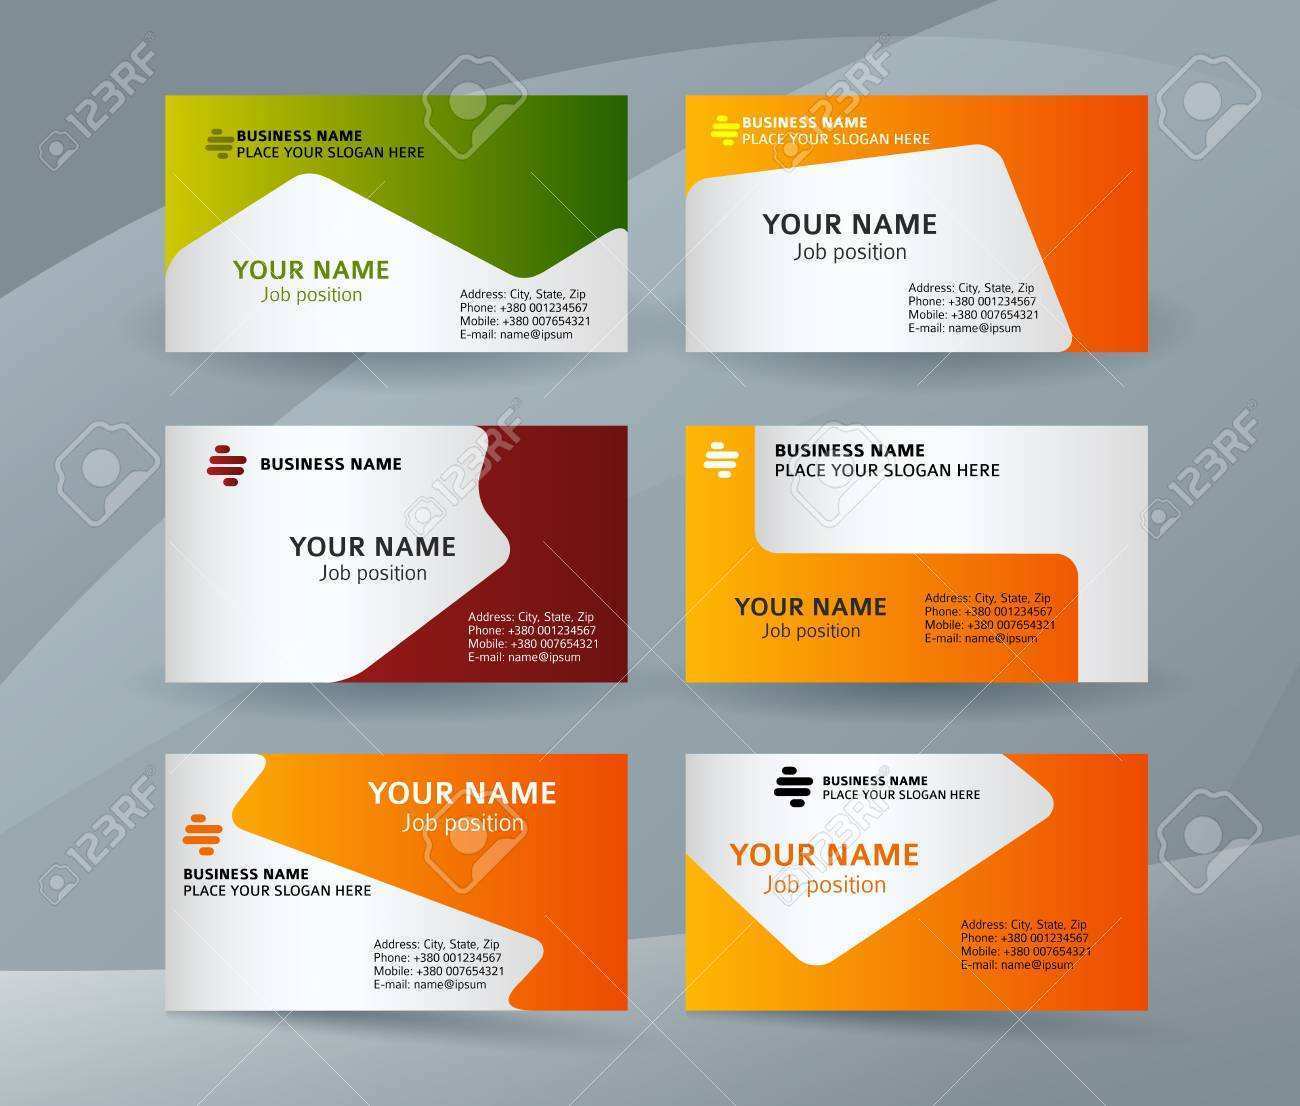 68 Online Business Card Template Zip in Photoshop for Business Card Template Zip